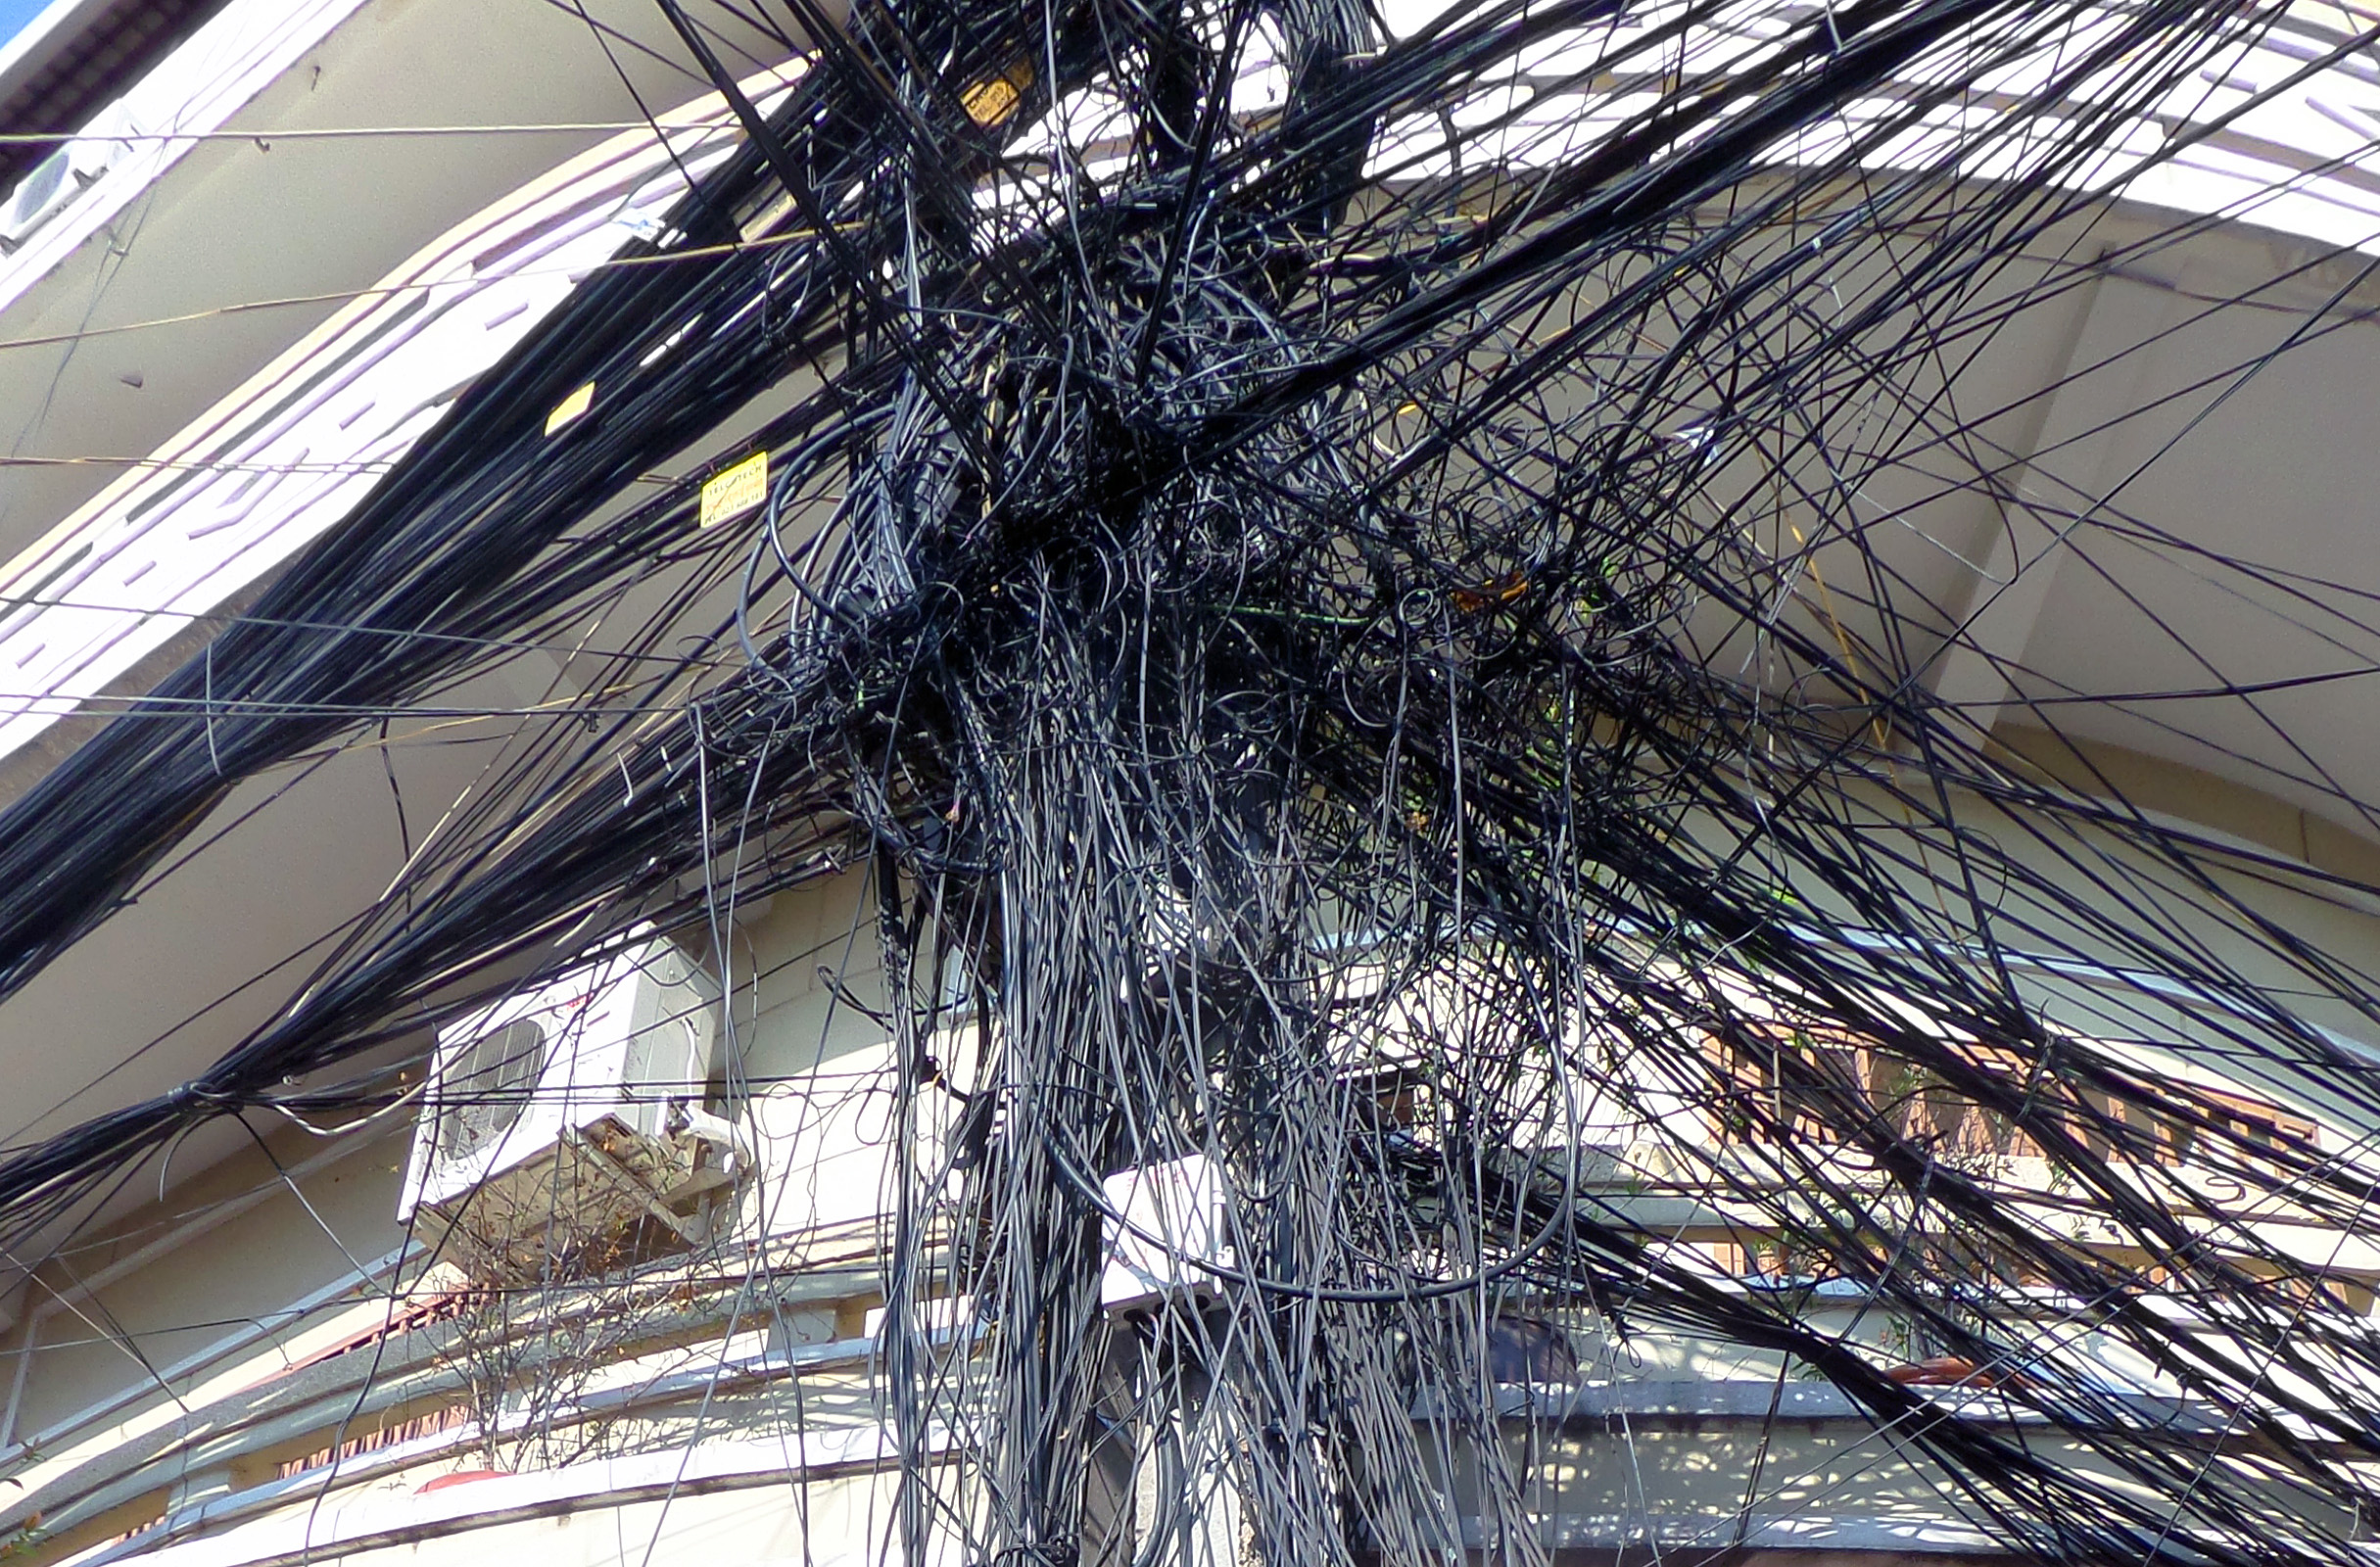 Chaotic cambodian street cabling photo